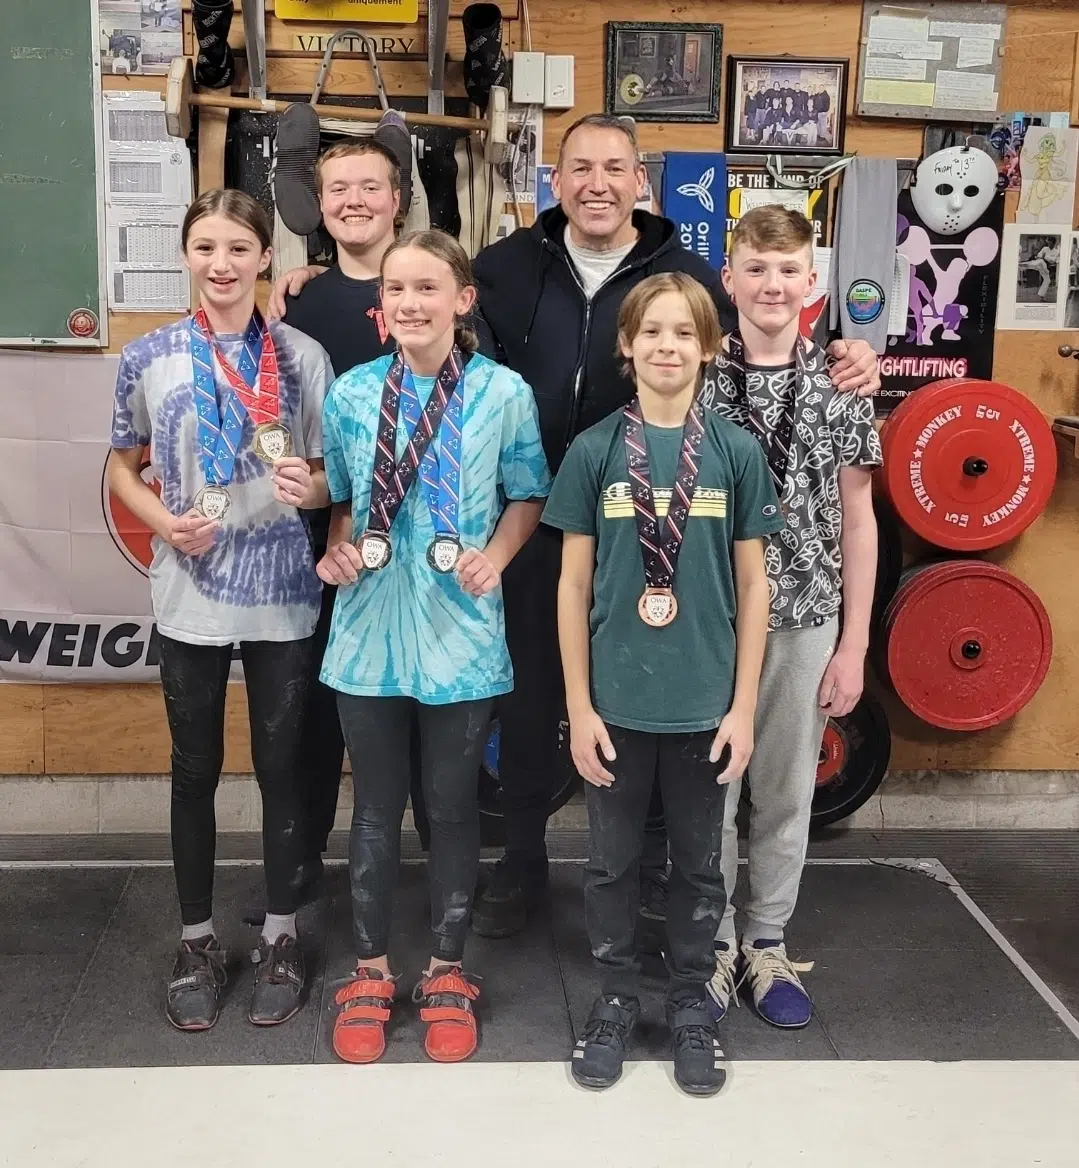 Victory Club "lifters" earn medals at Provincials